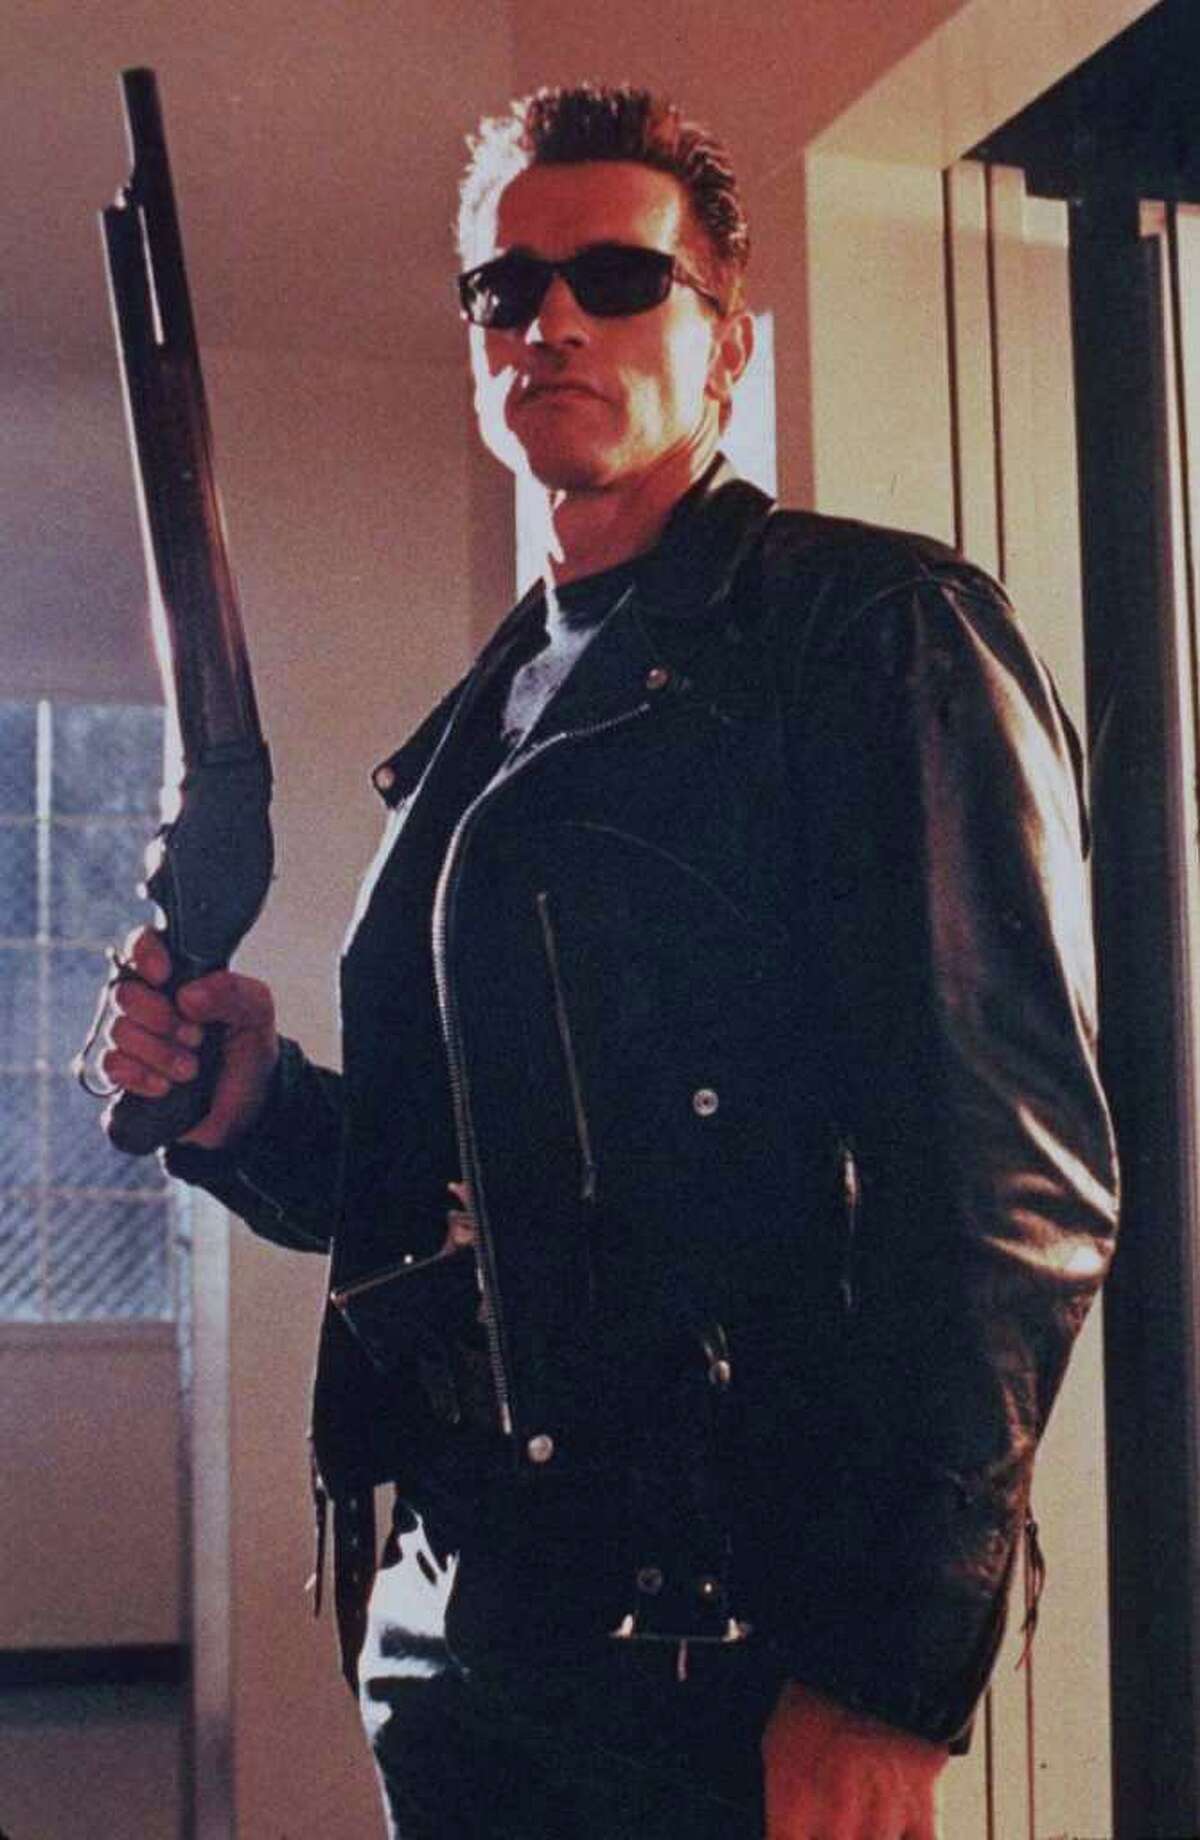 In 1984's "The Terminator," Skynet, nearly defeated, sends Terminator Arnold Schwarzenegger back in time to kill the mother of resistance leader John Connor before Connor is born.